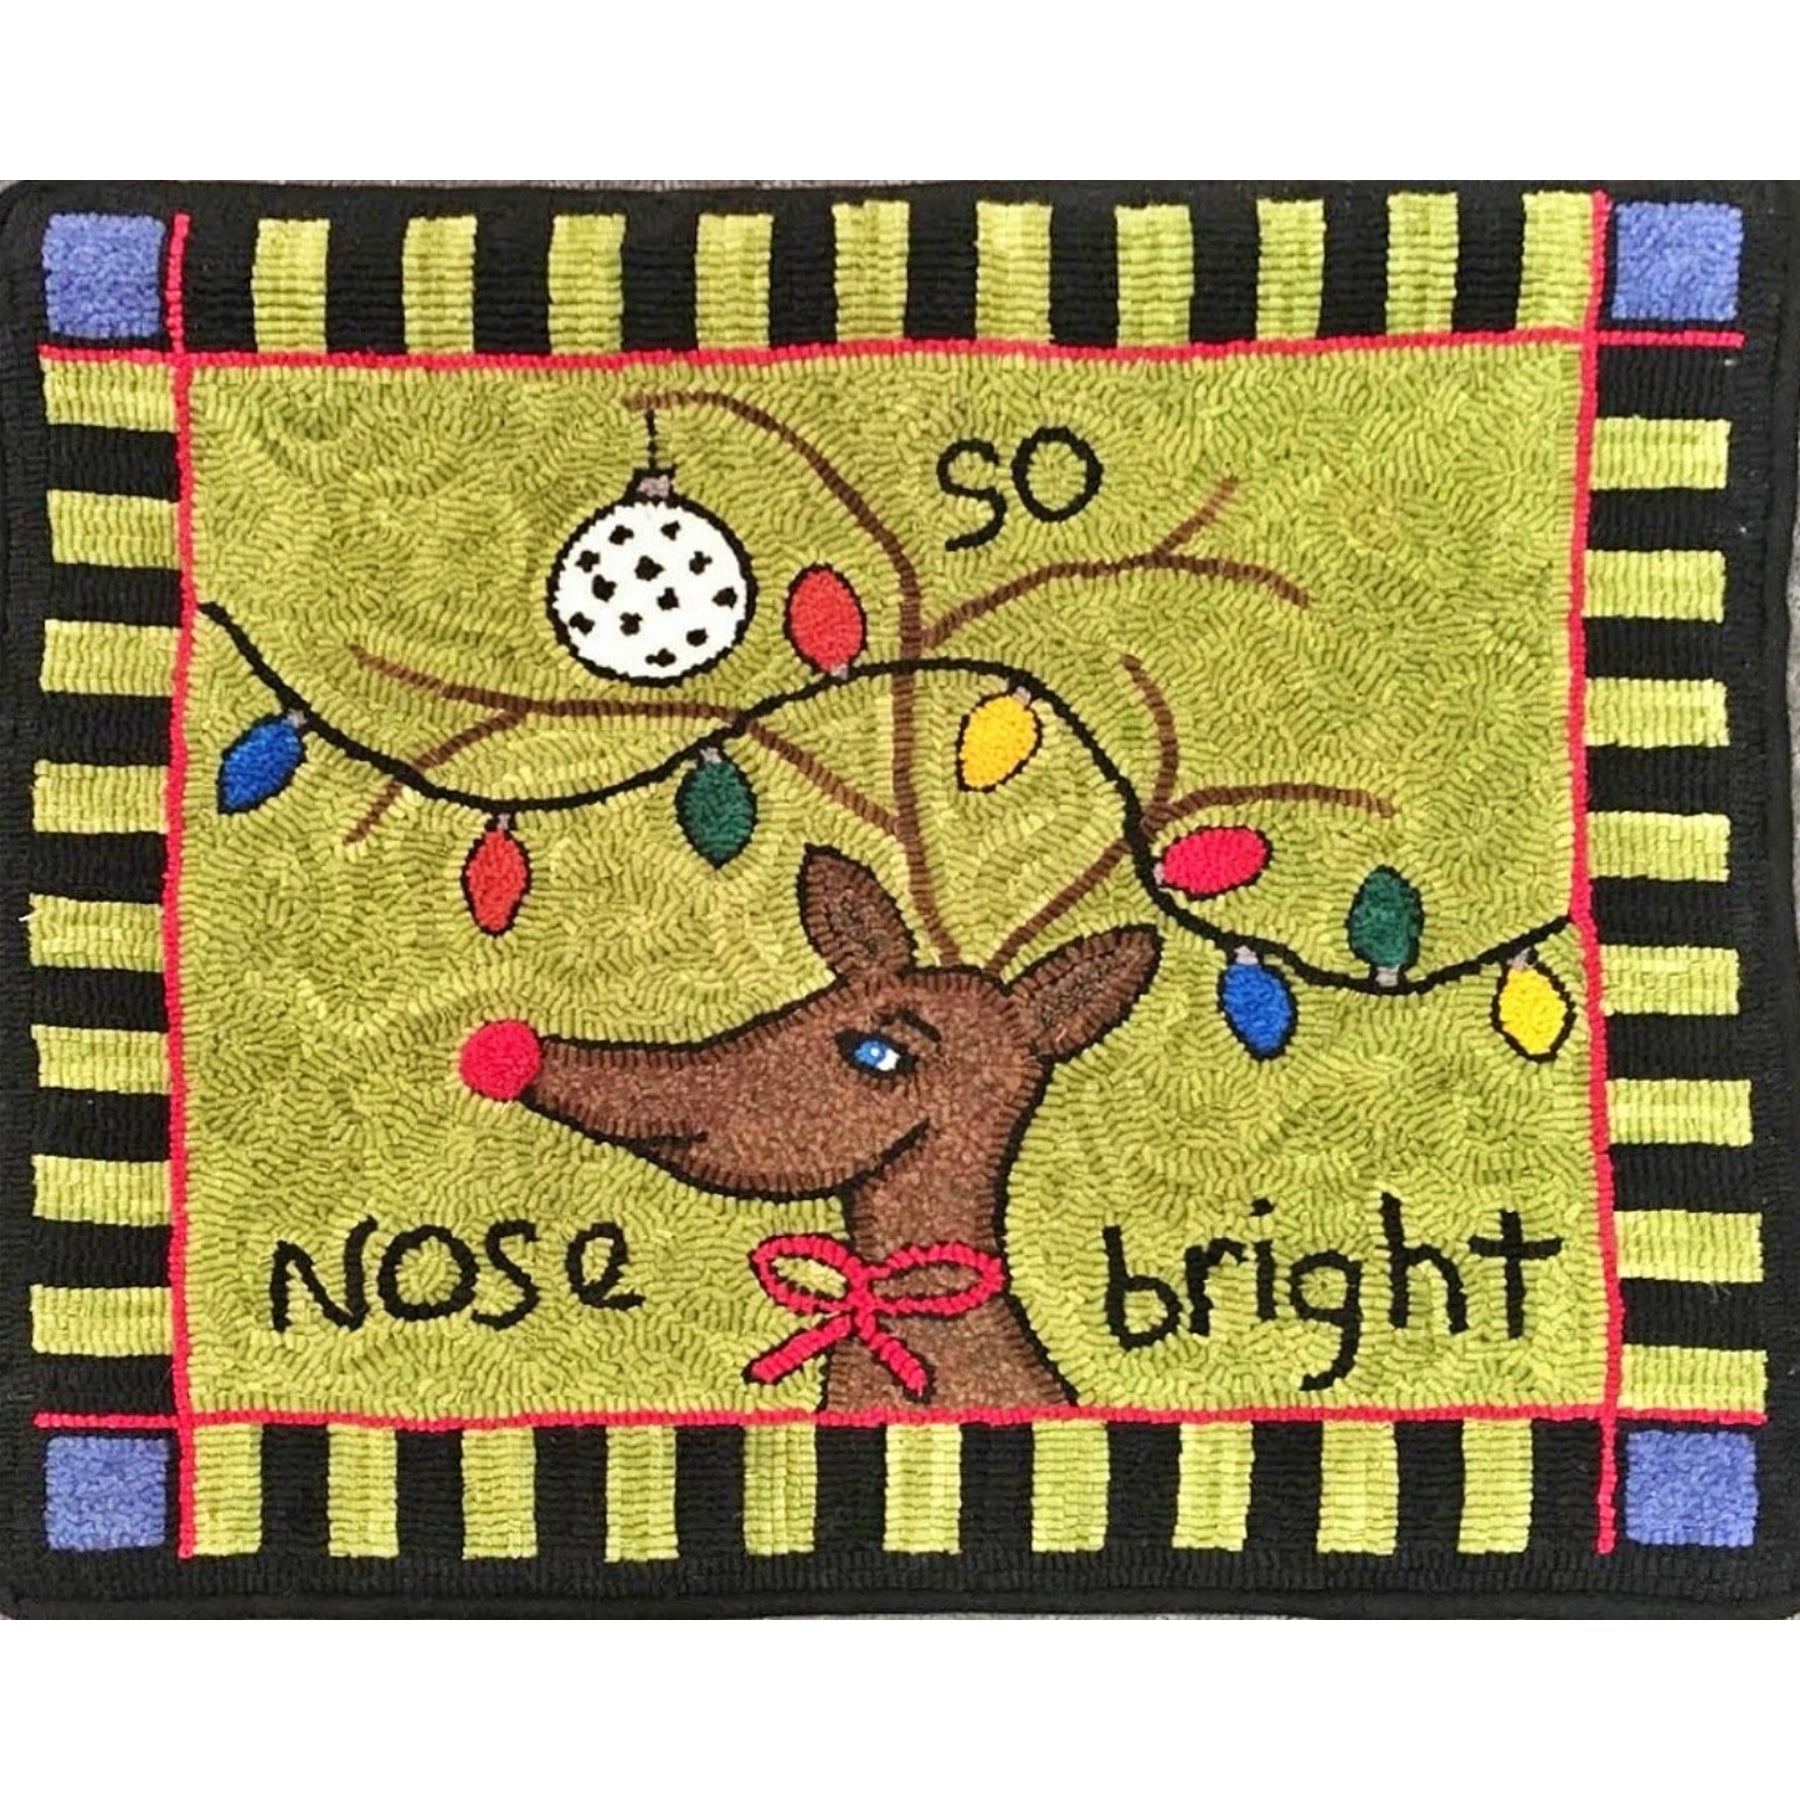 Nose So Bright, rug hooking pattern